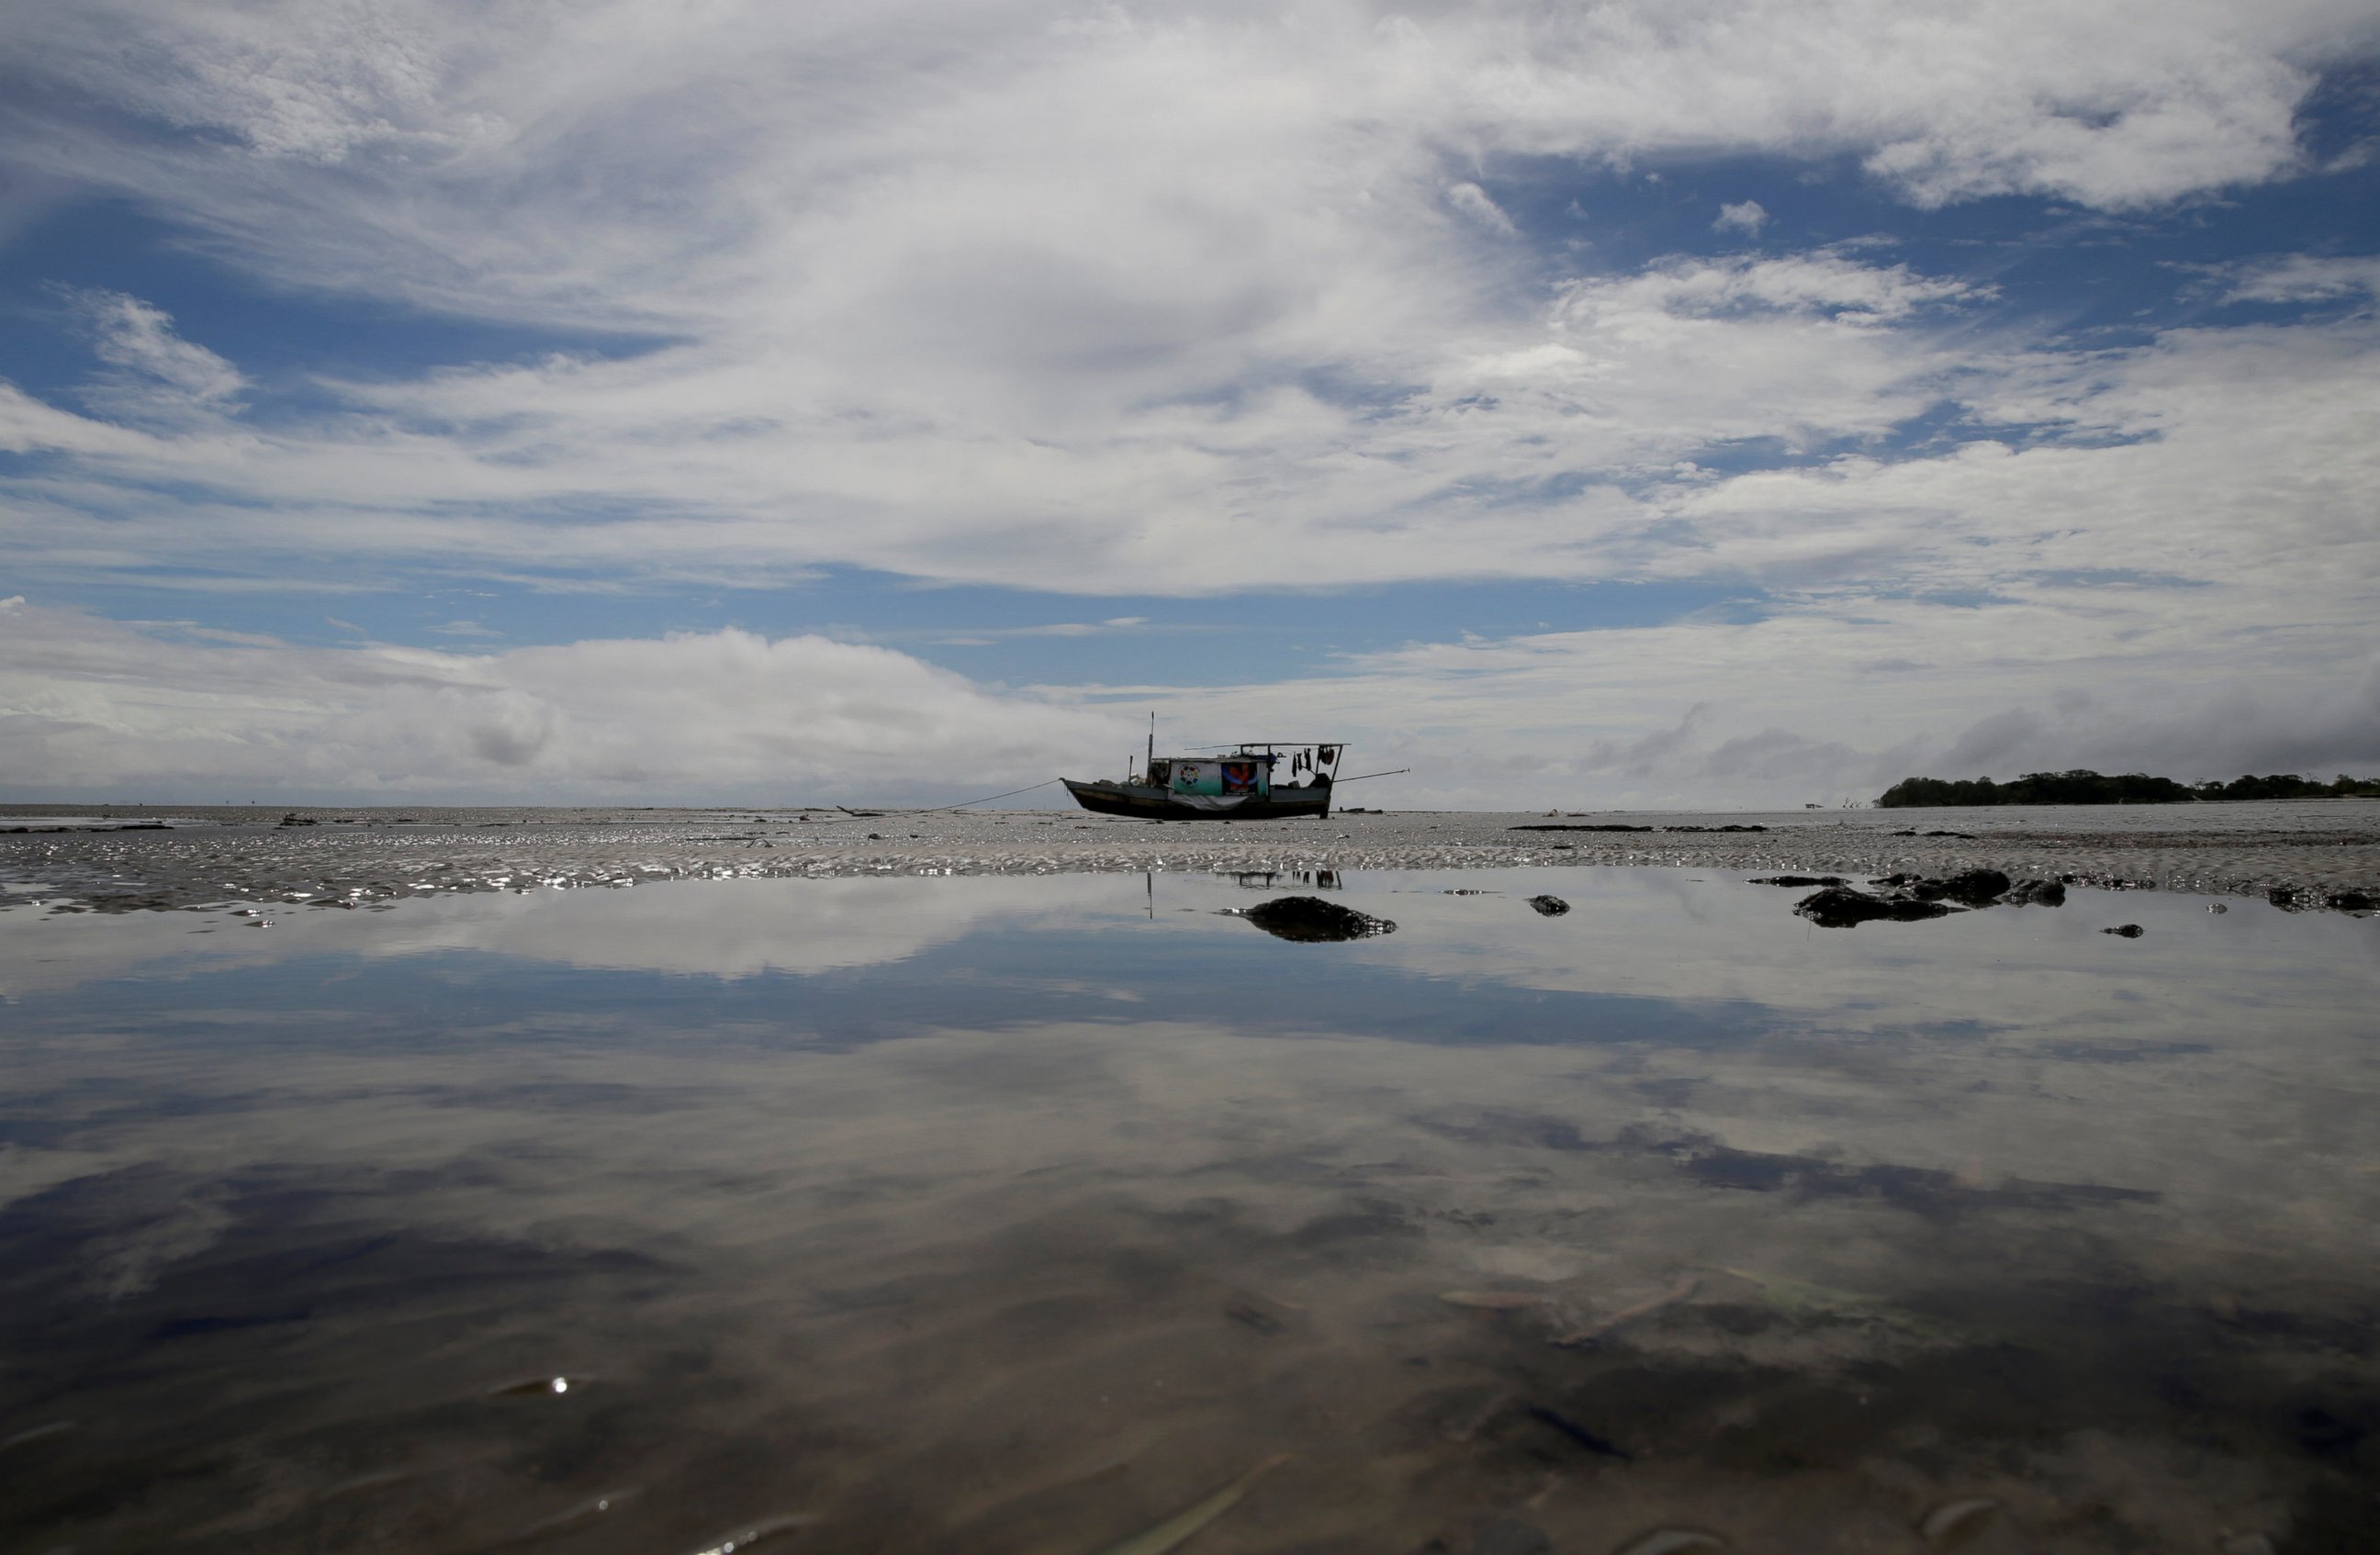 PHOTO: A boat stands during low tide at the mouth of the Calcoene River where it joins the Atlantic Ocean on the coast of Amapa state, northern Brazil, April 6, 2017. 